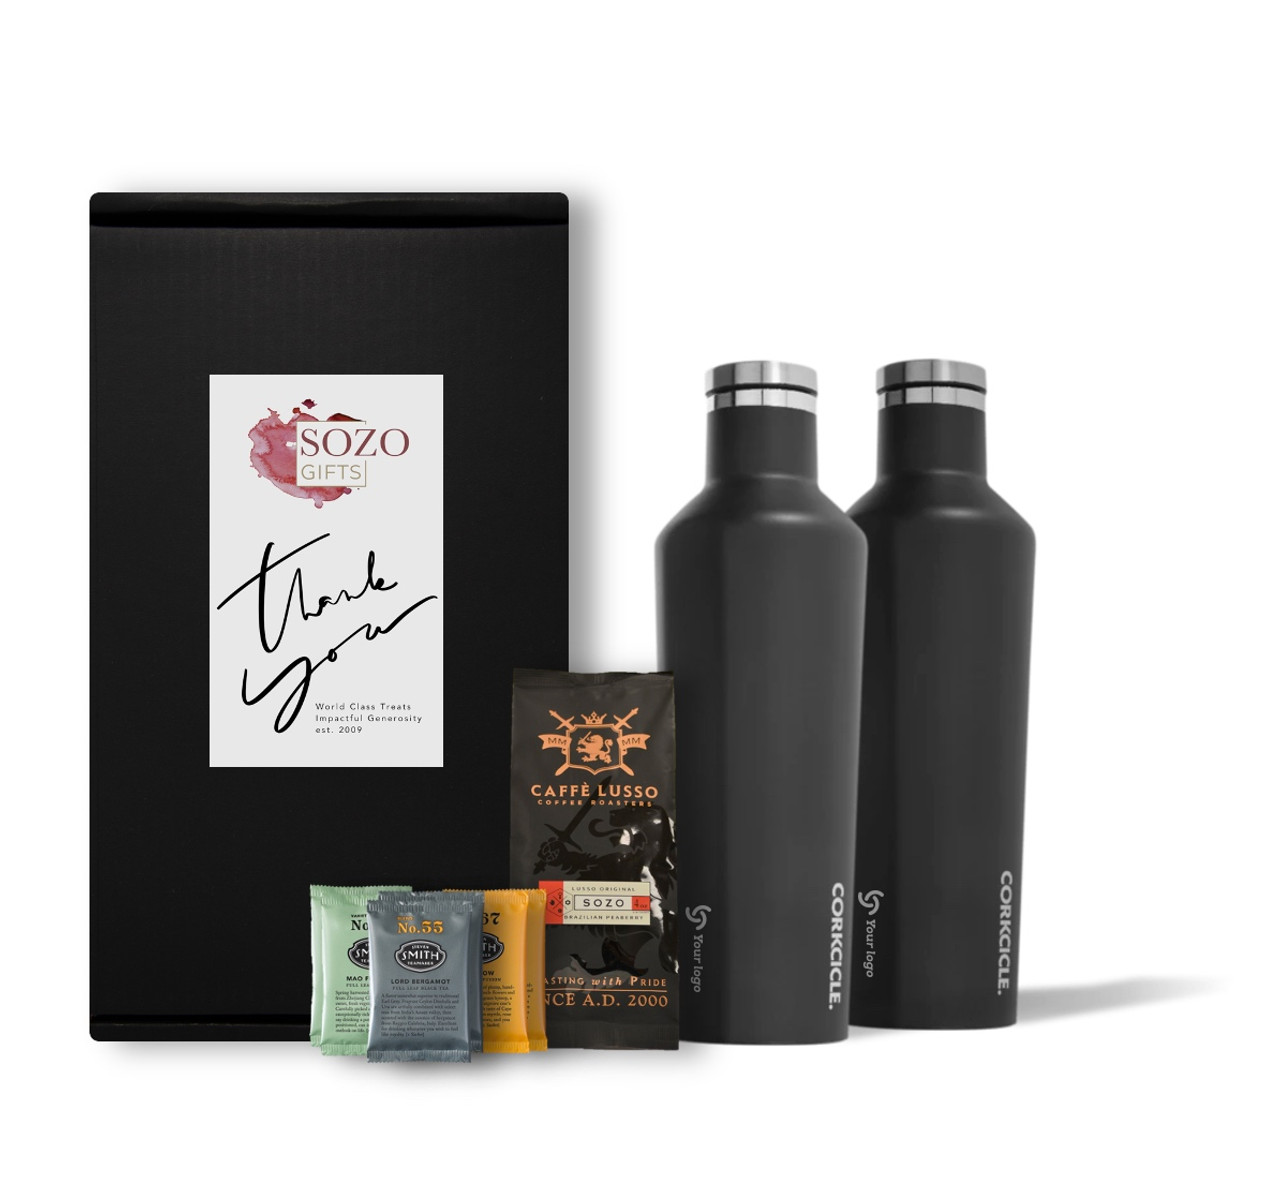 https://cdn11.bigcommerce.com/s-kgihy4hax9/images/stencil/1280x1280/products/212/939/Sozo_Gifts_Corkcicle_Canteen_Pair_and_Treats_Gift_Box__86320.1632775678.jpg?c=1